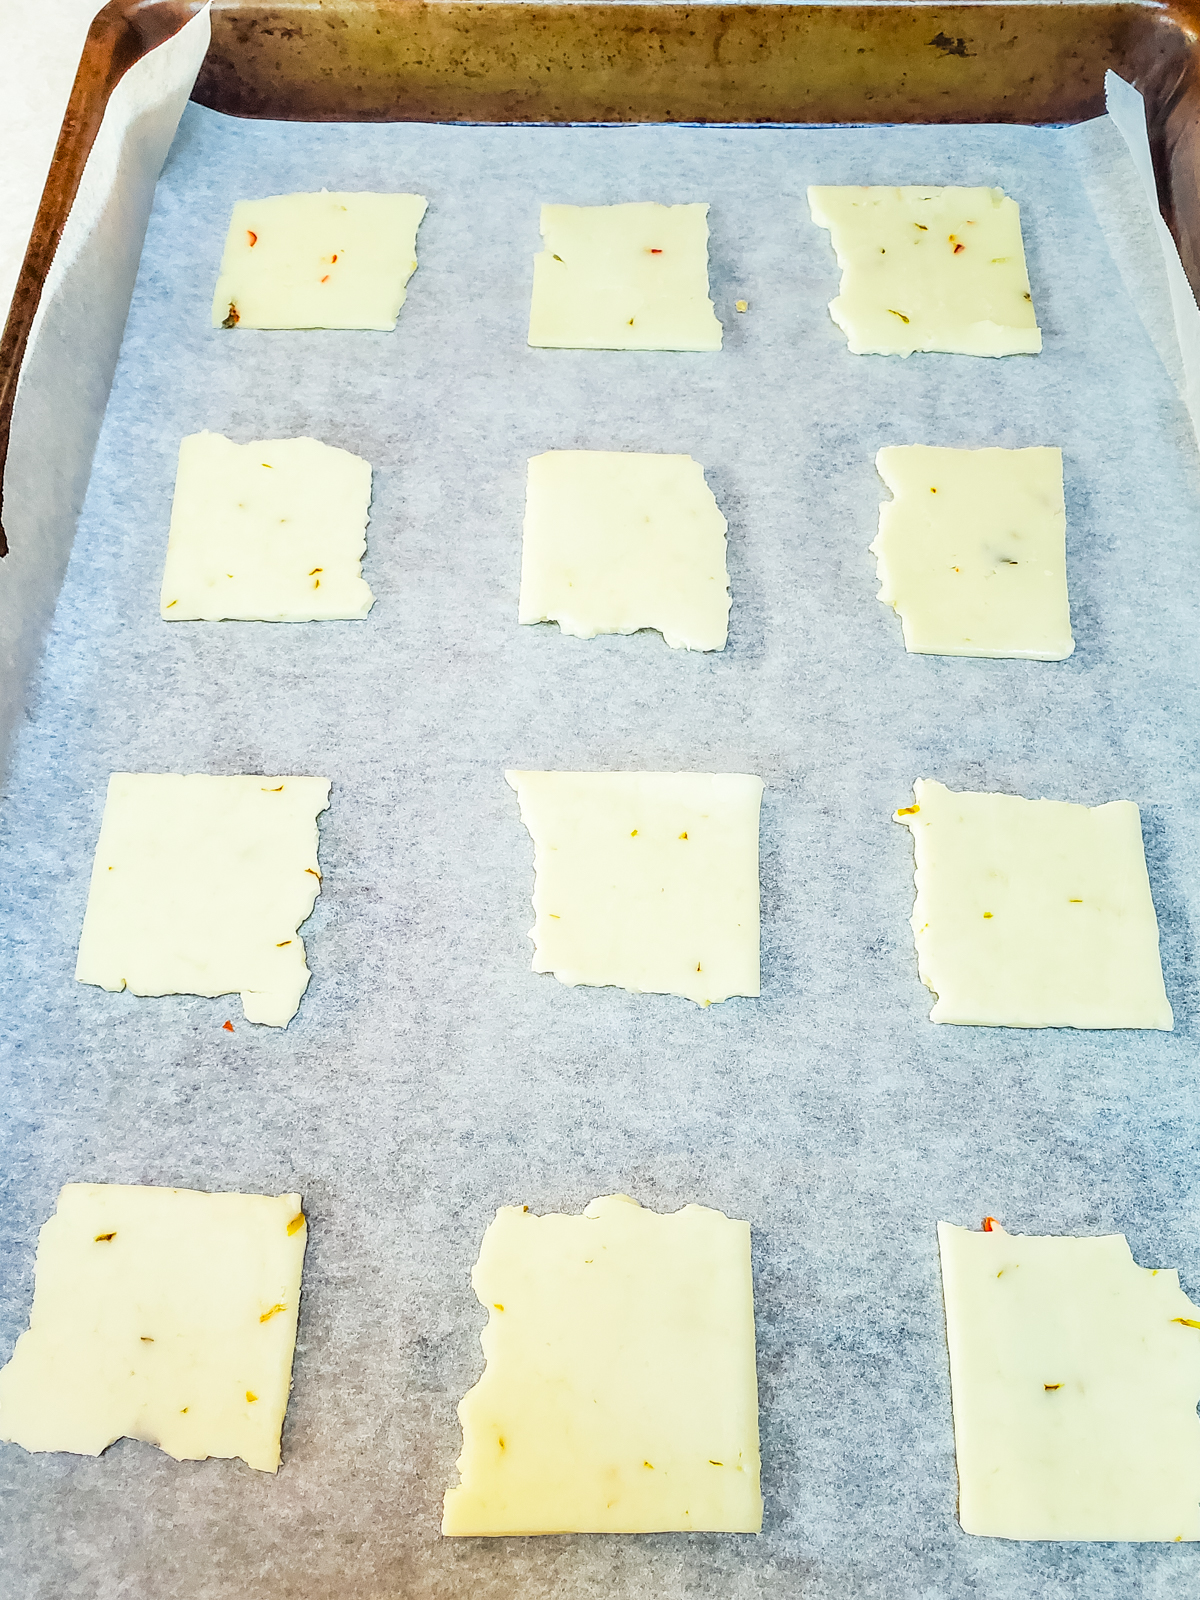 placing pieces of sliced cheese on a baking sheet lined with parchment paper.